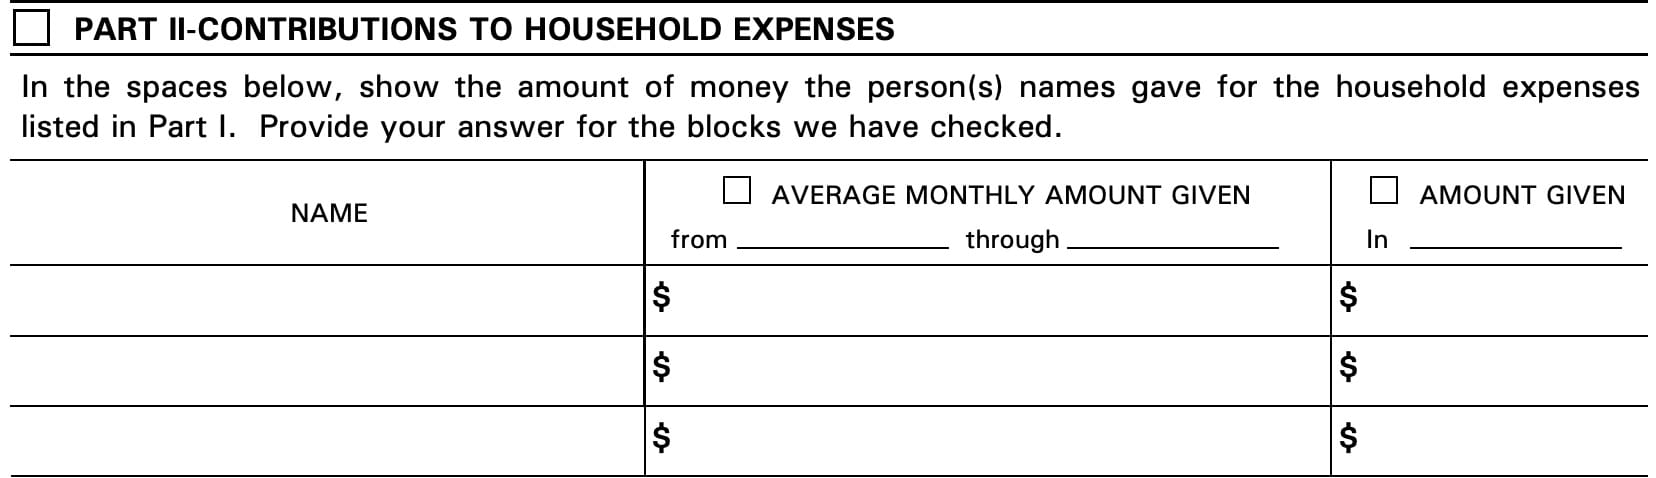 form ssa 8011-f3 part ii, contributions to household expenses